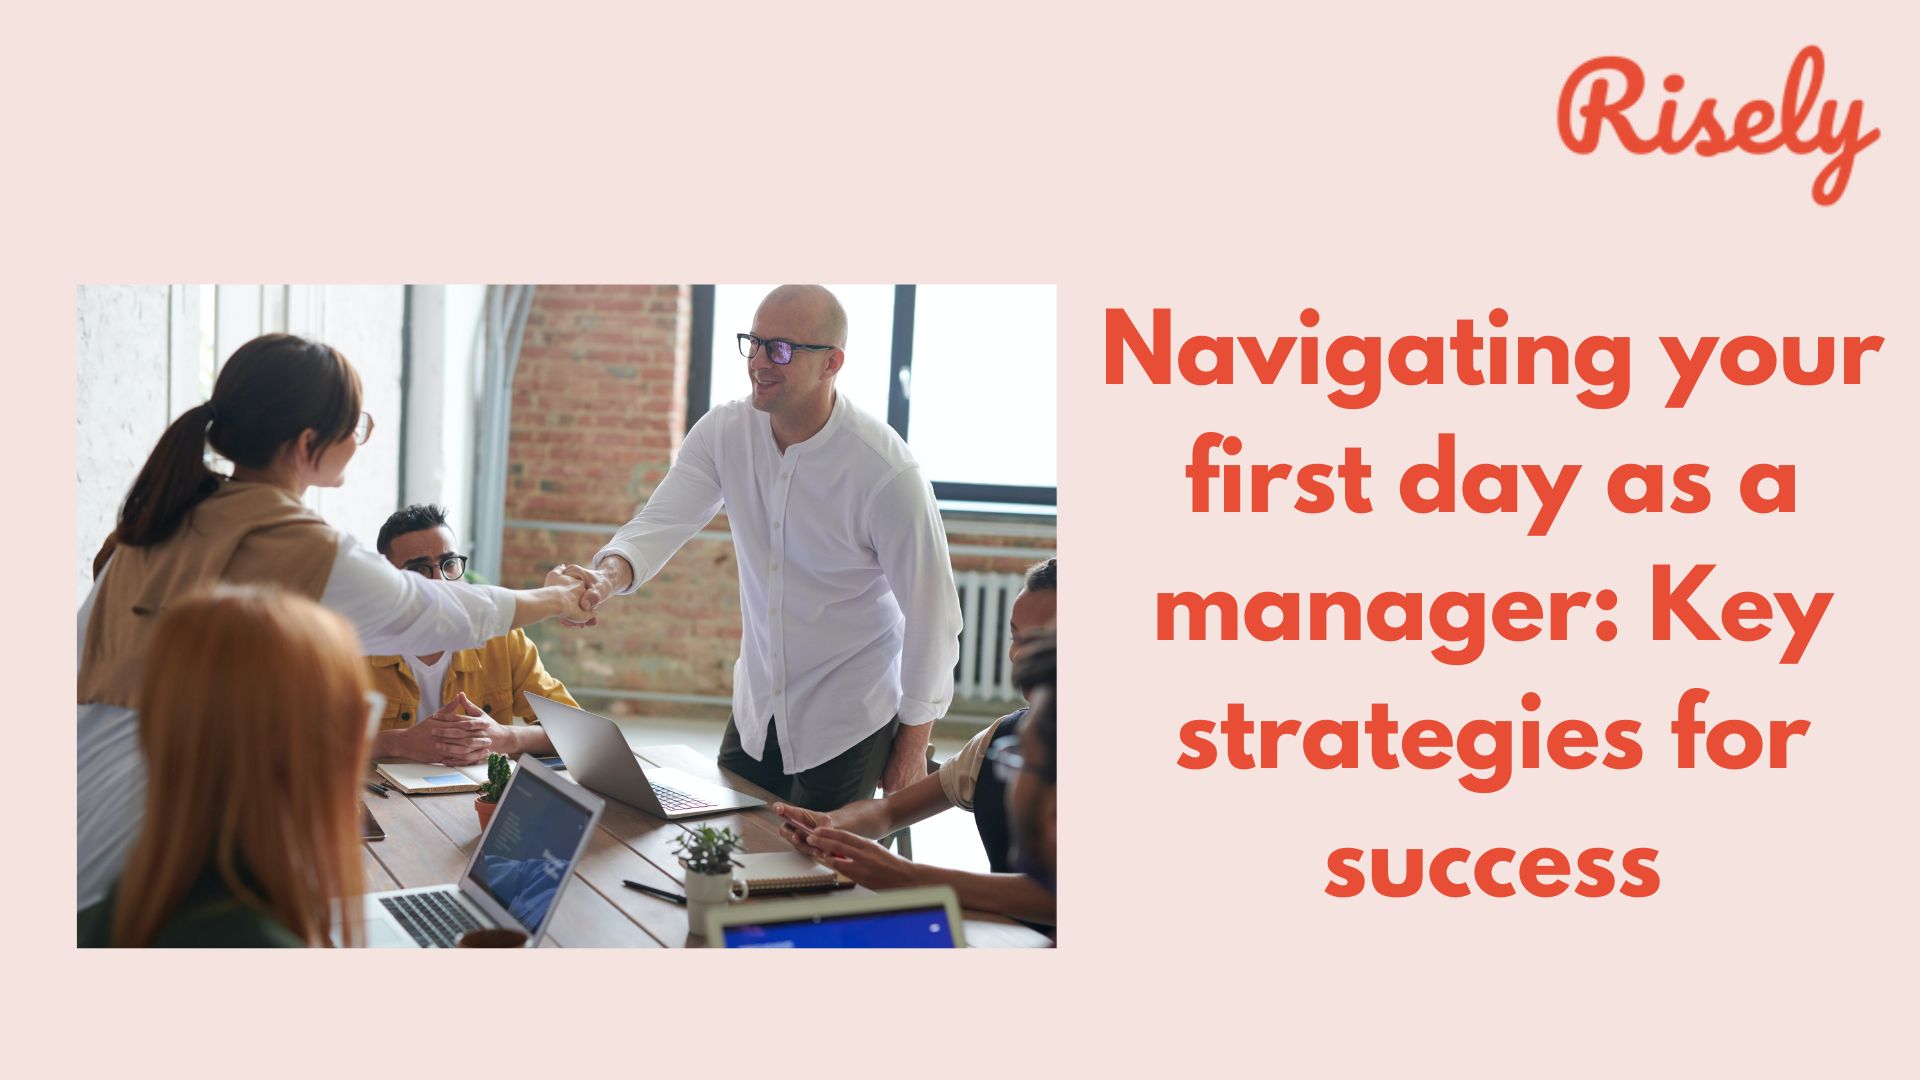 Navigating your first day as a manager: Key strategies for success